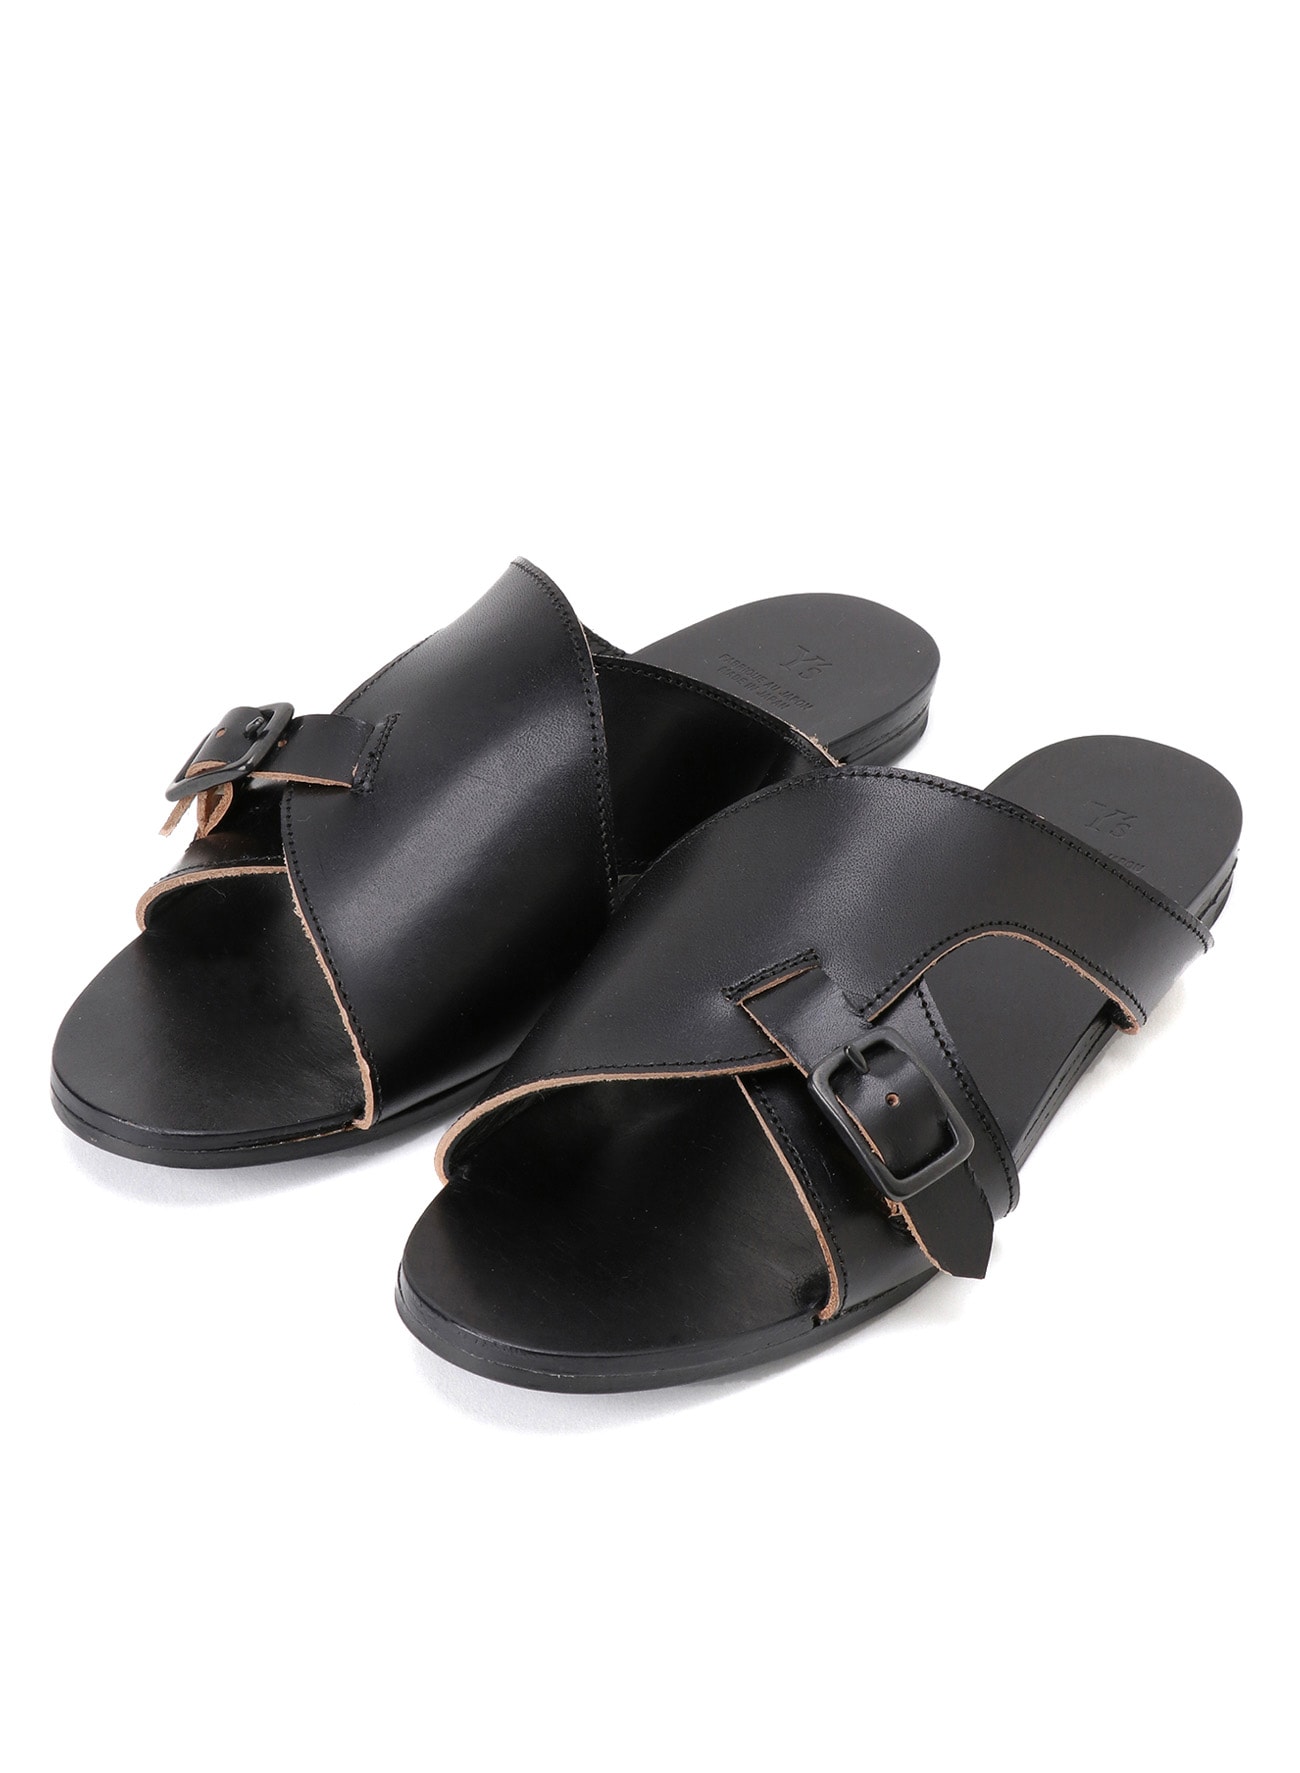 SEMI GLOSS TANNED LEATHER FLAT SANDALS